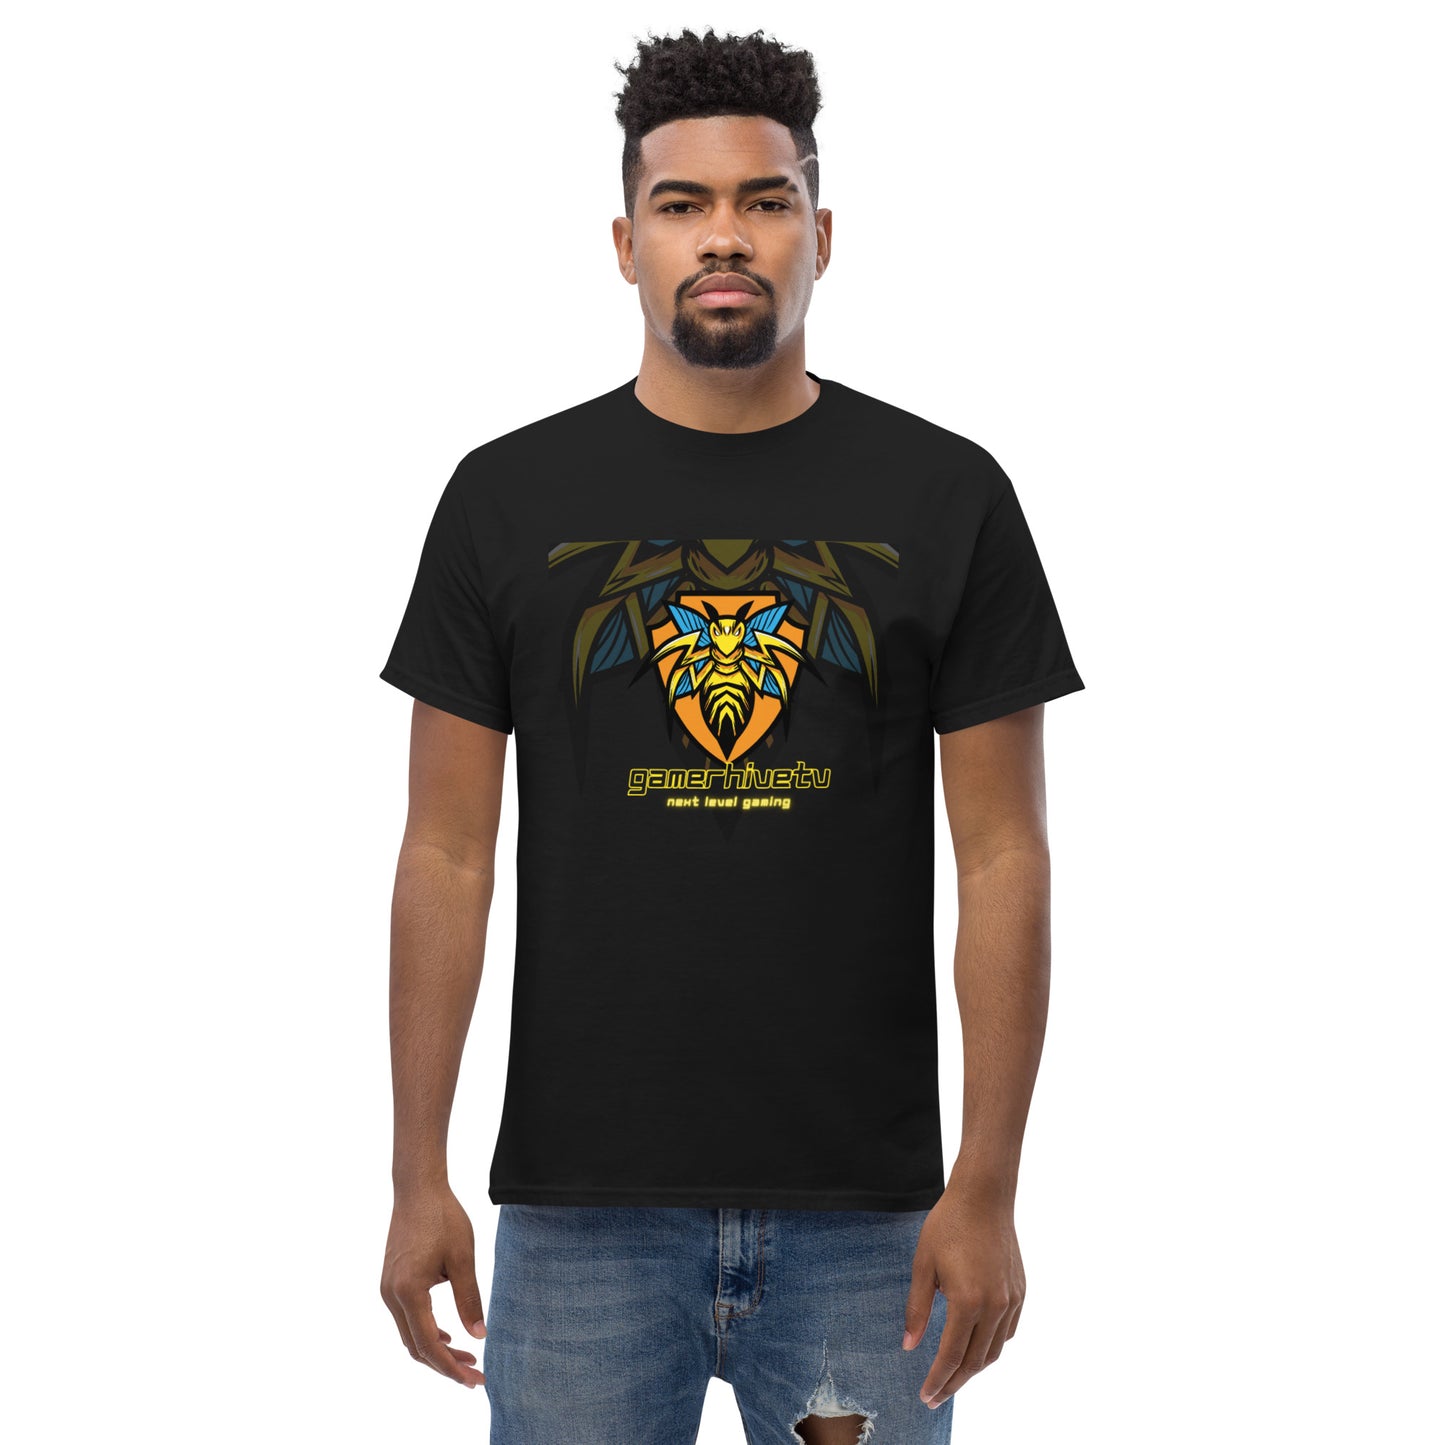 Man in black classic tee, with the GamerHiveTV brand